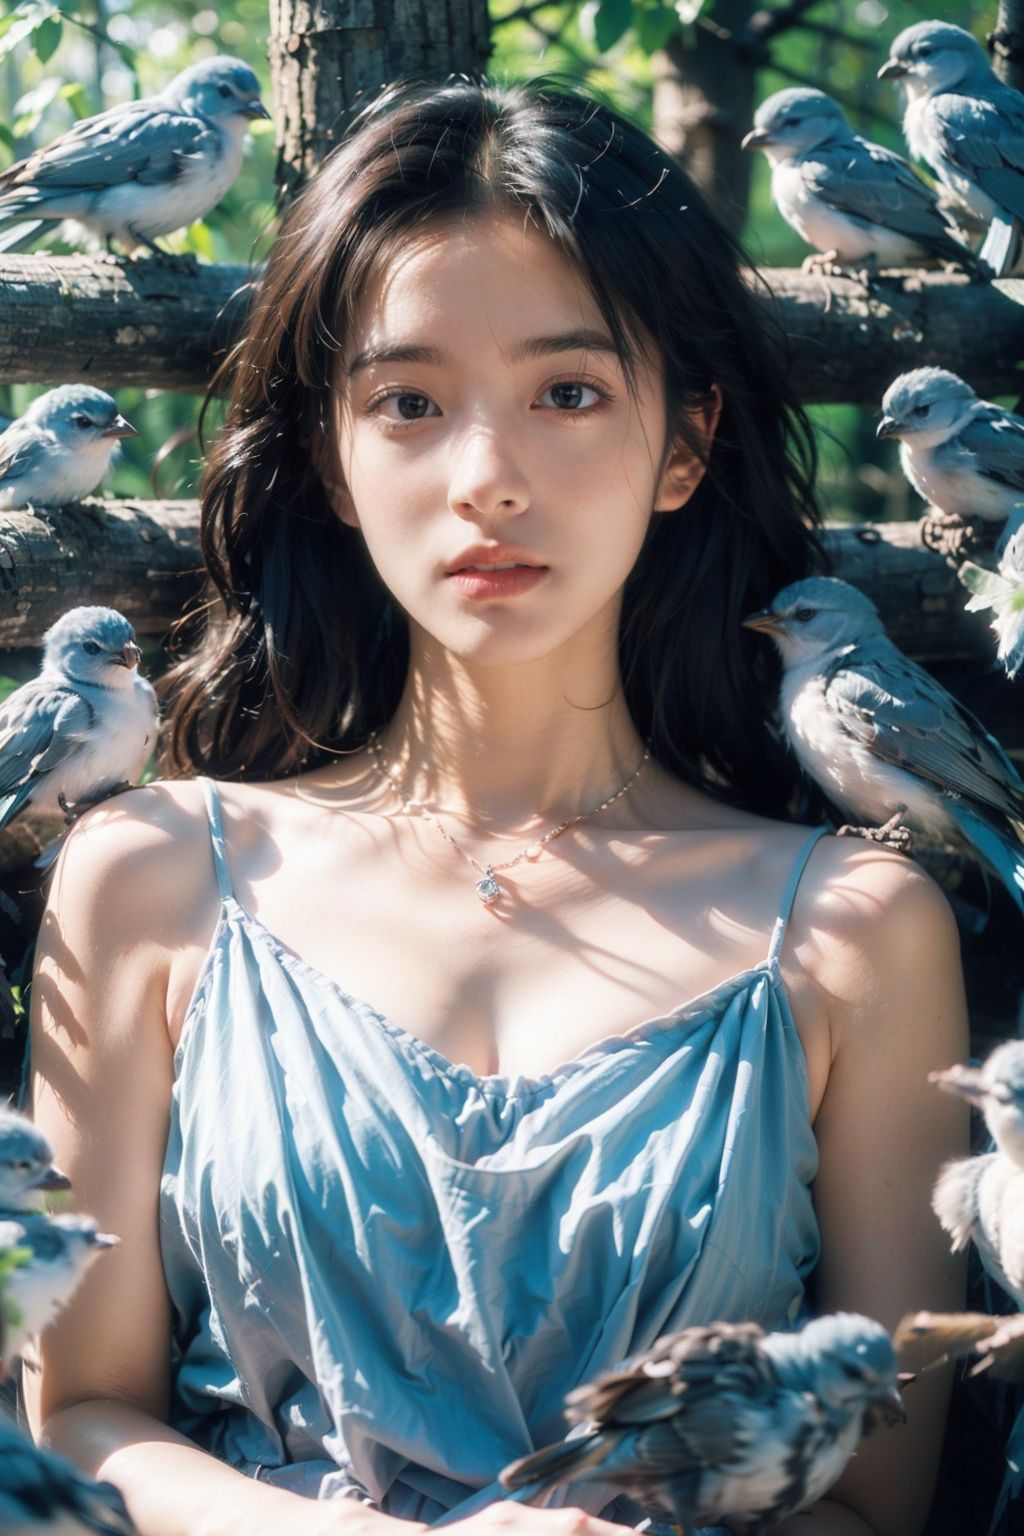  (Masterpiece, best quality, high-resolution: 1.2), (upper body), 1 girl, blue floral dress. Solo, (surrounded by 20 birds), powder blusher, smoky makeup, lipstick, diamond necklace, black hair, long black hair, flowers, trees, 20 identical birds sleep together, squeeze each other, squint. Foreground occlusion, portrait, depth of field, looking at the audience, slow motion, rose, retro, anatomical correctness, best quality, movie lighting